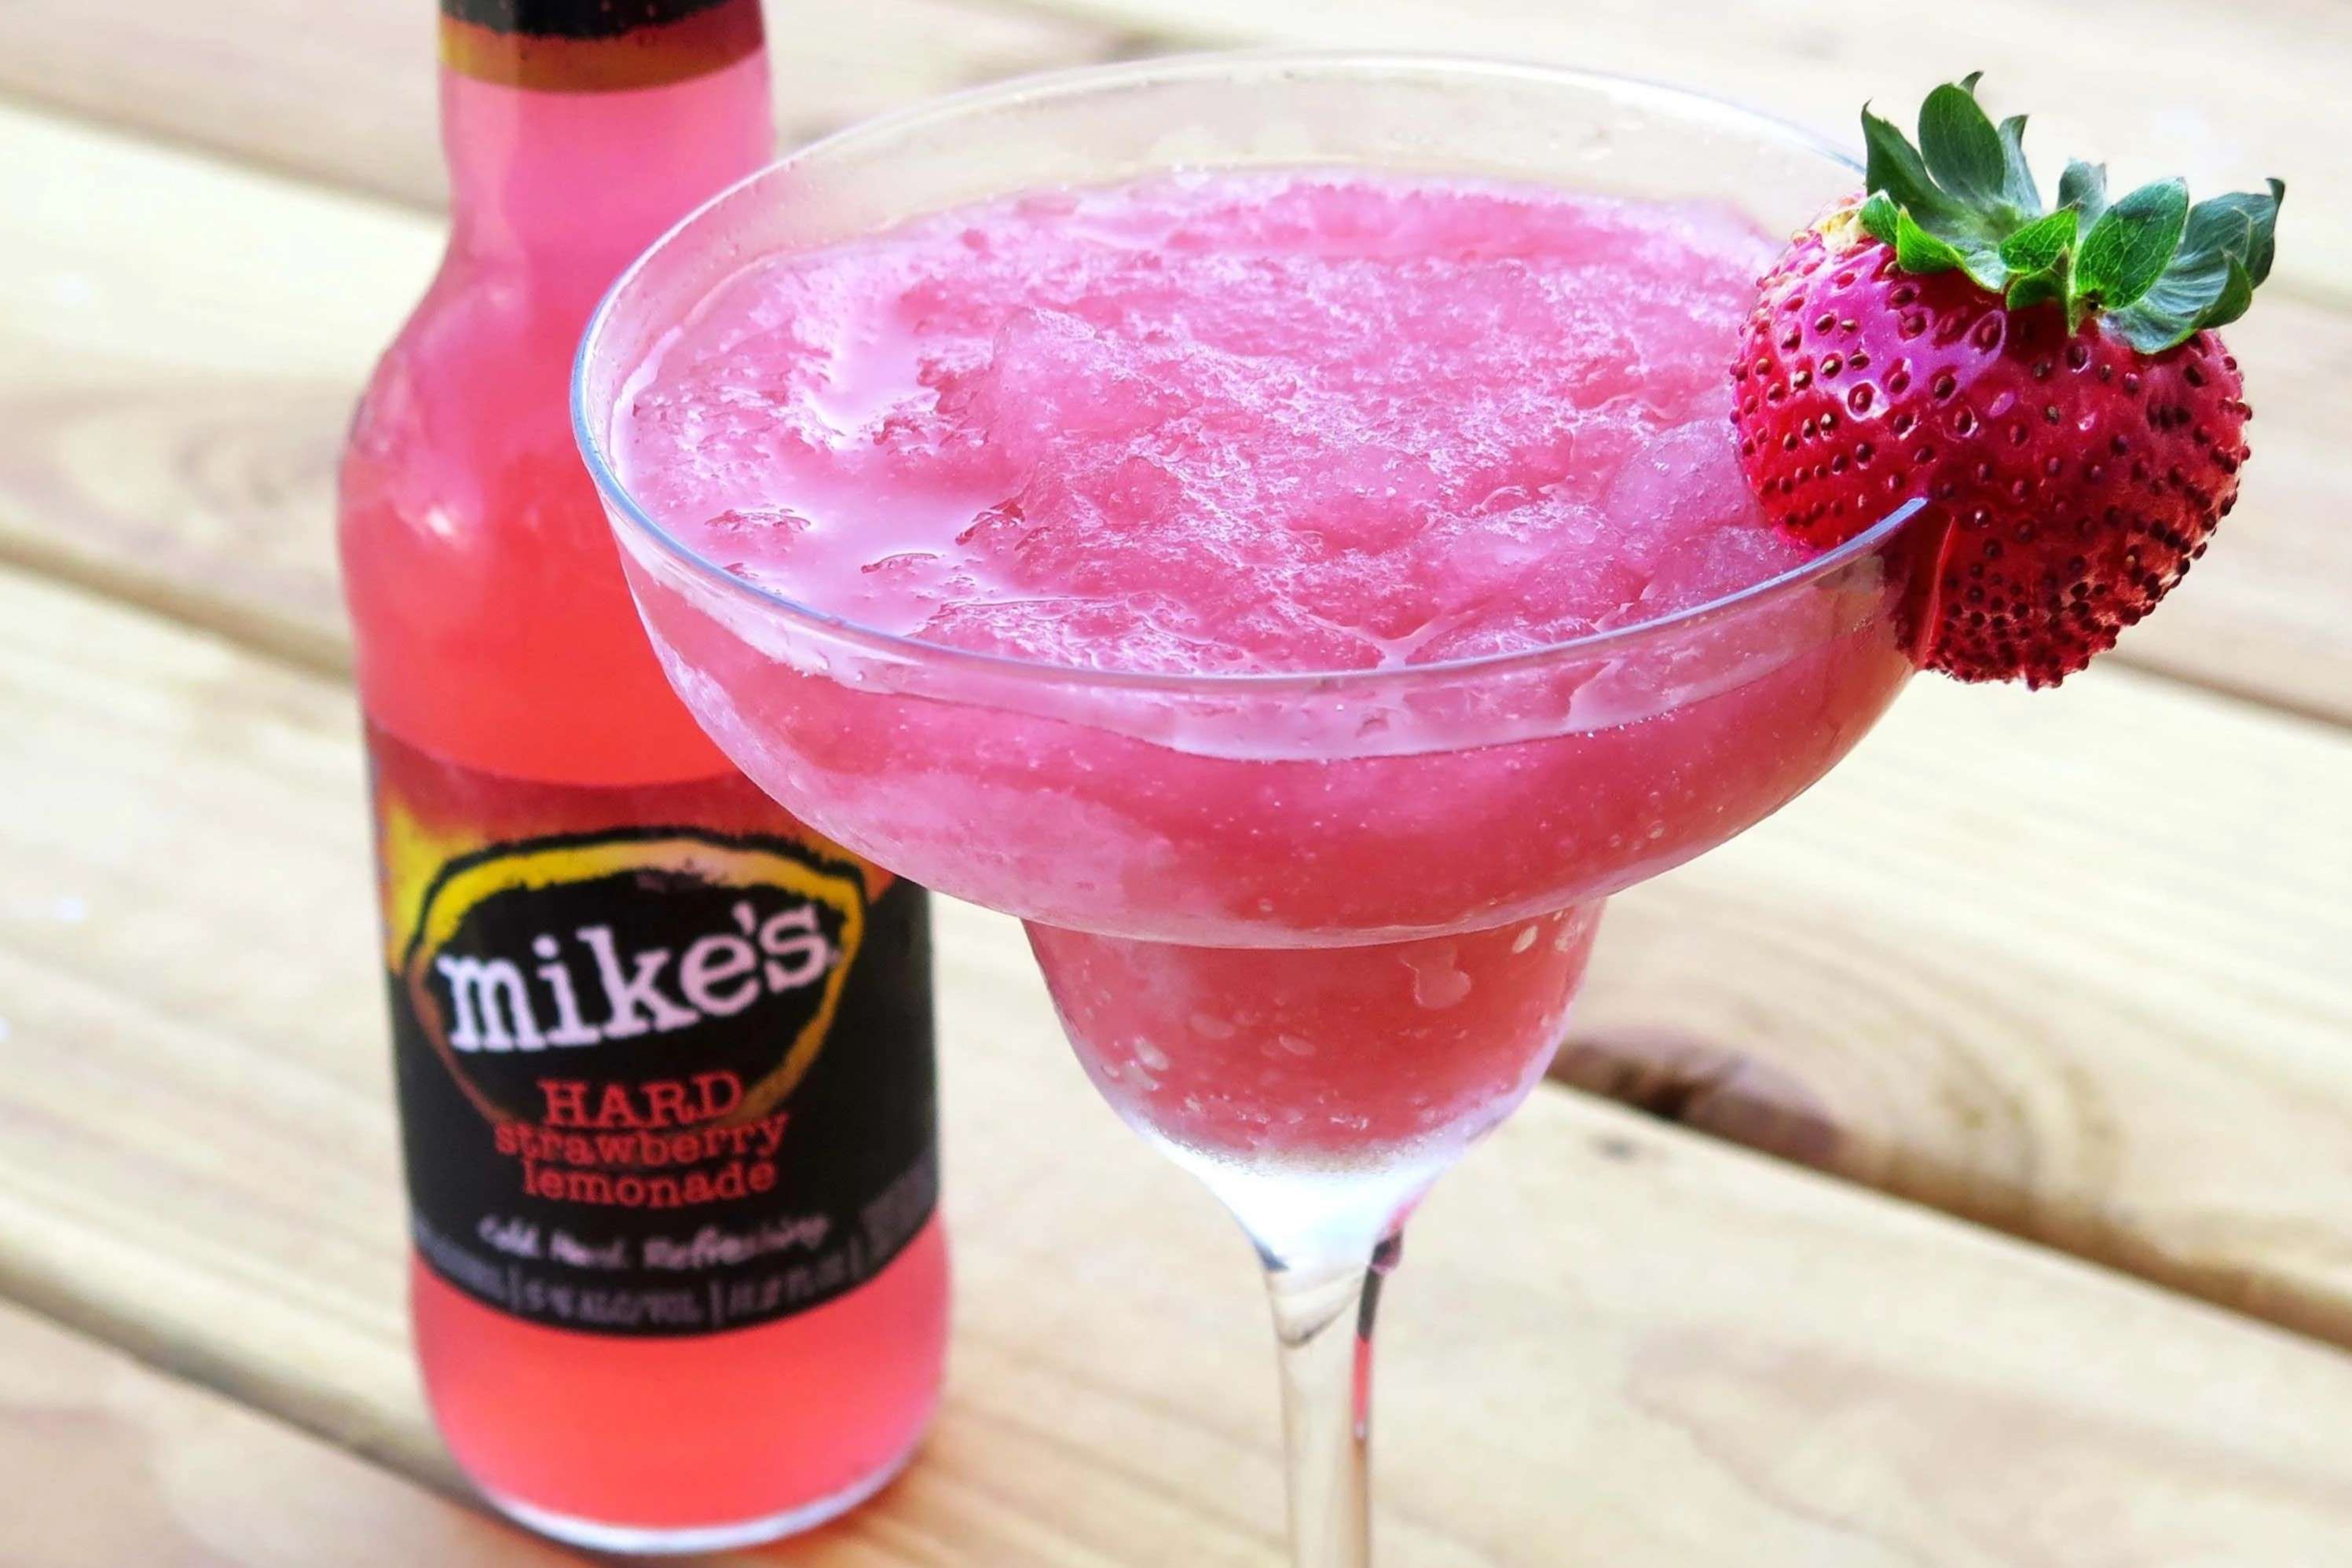 19-mikes-hard-strawberry-lemonade-nutrition-facts